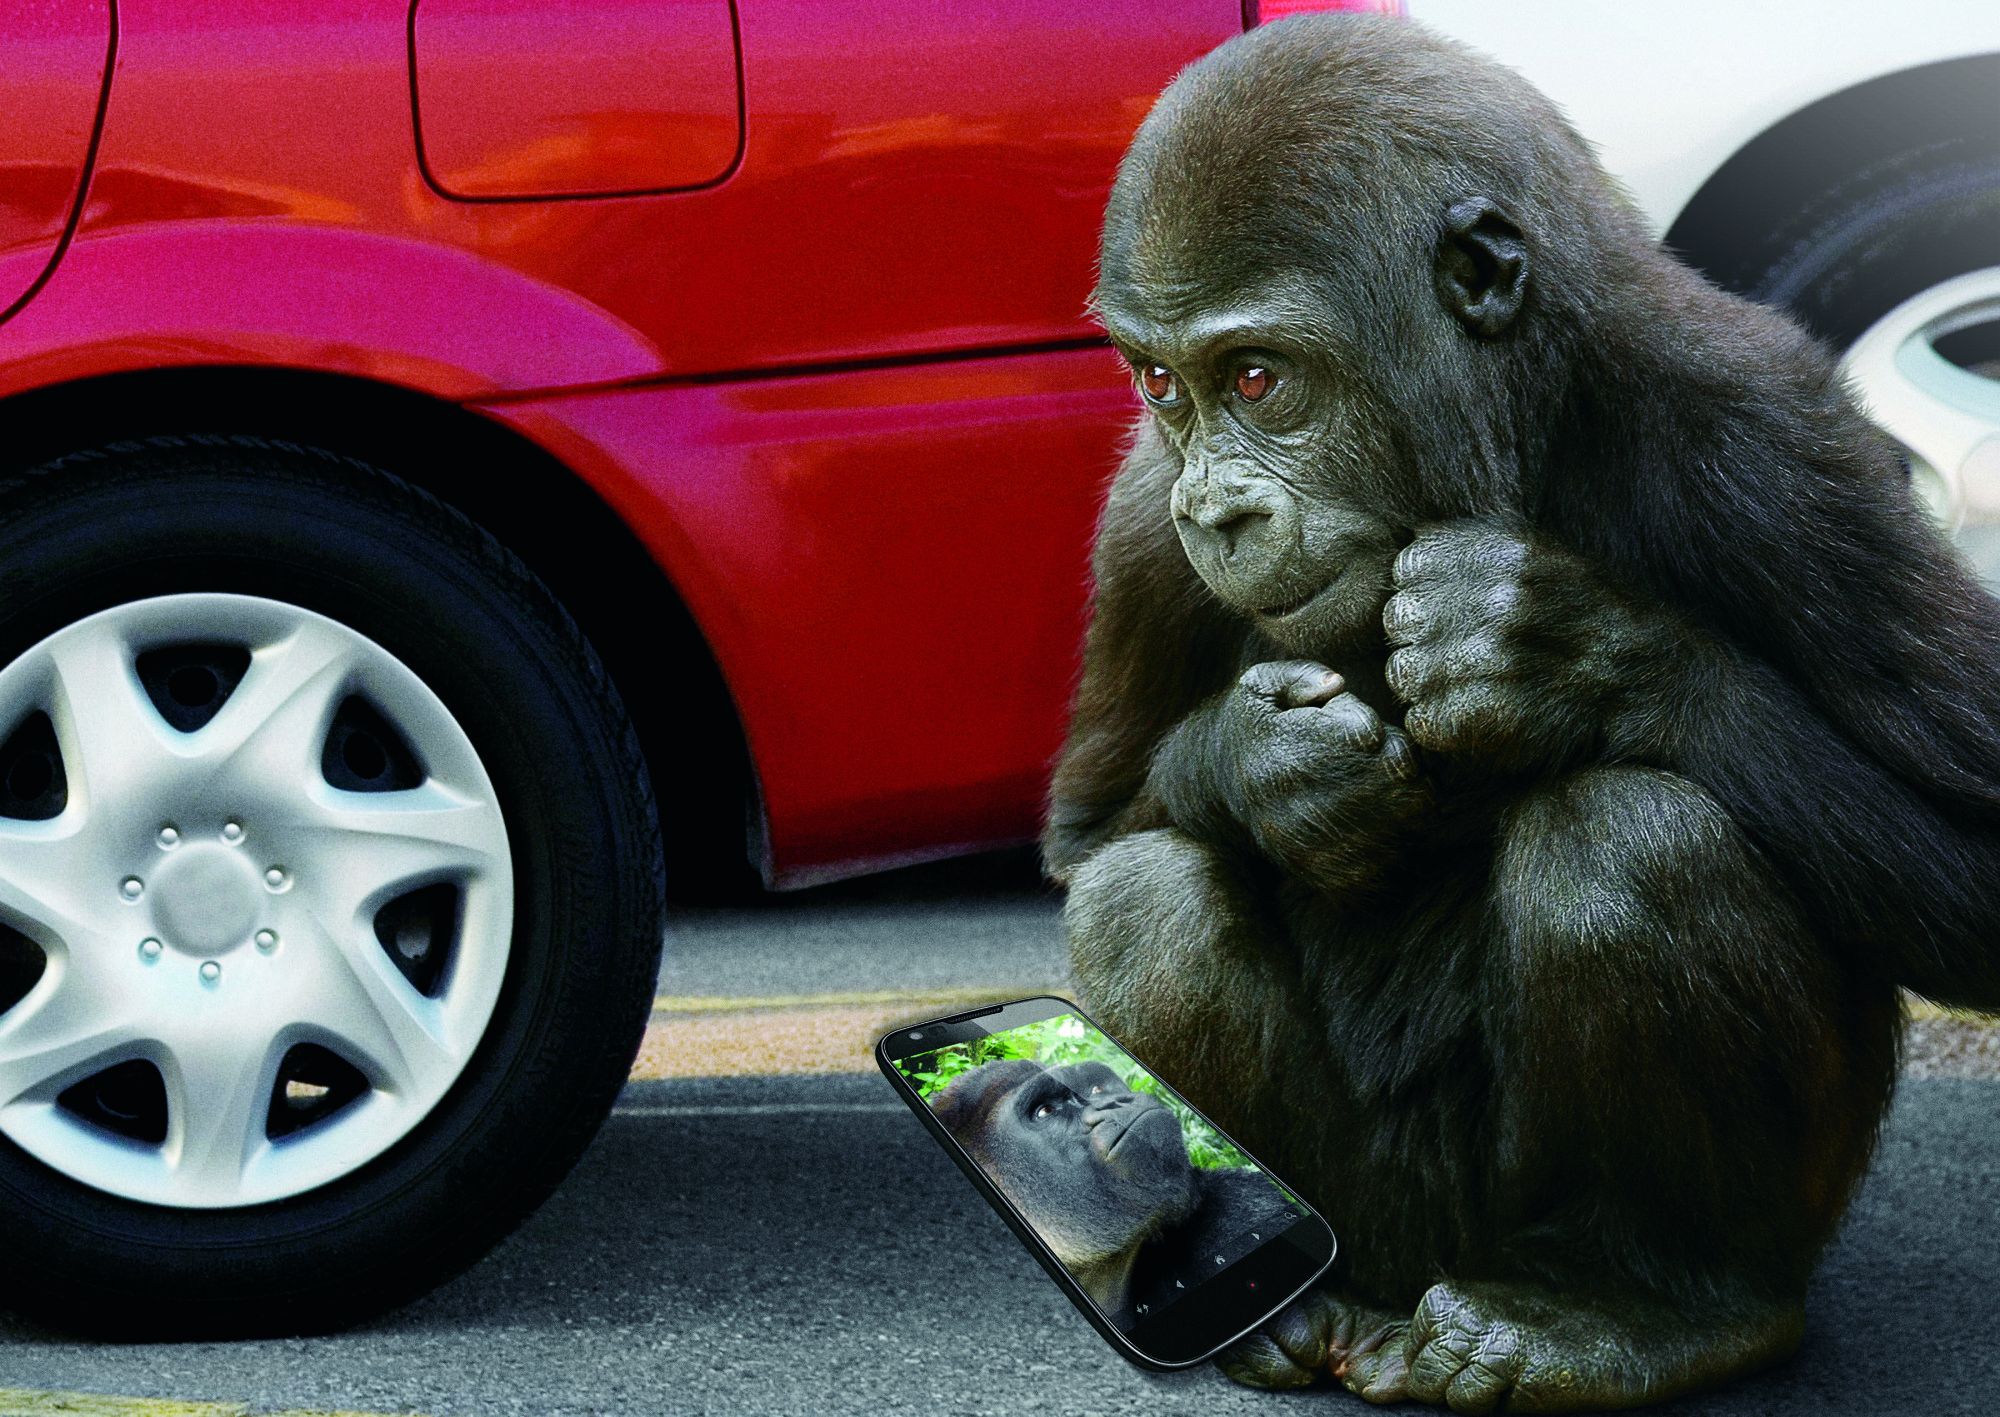 Keep Your Devices Safe With Gorilla Glass